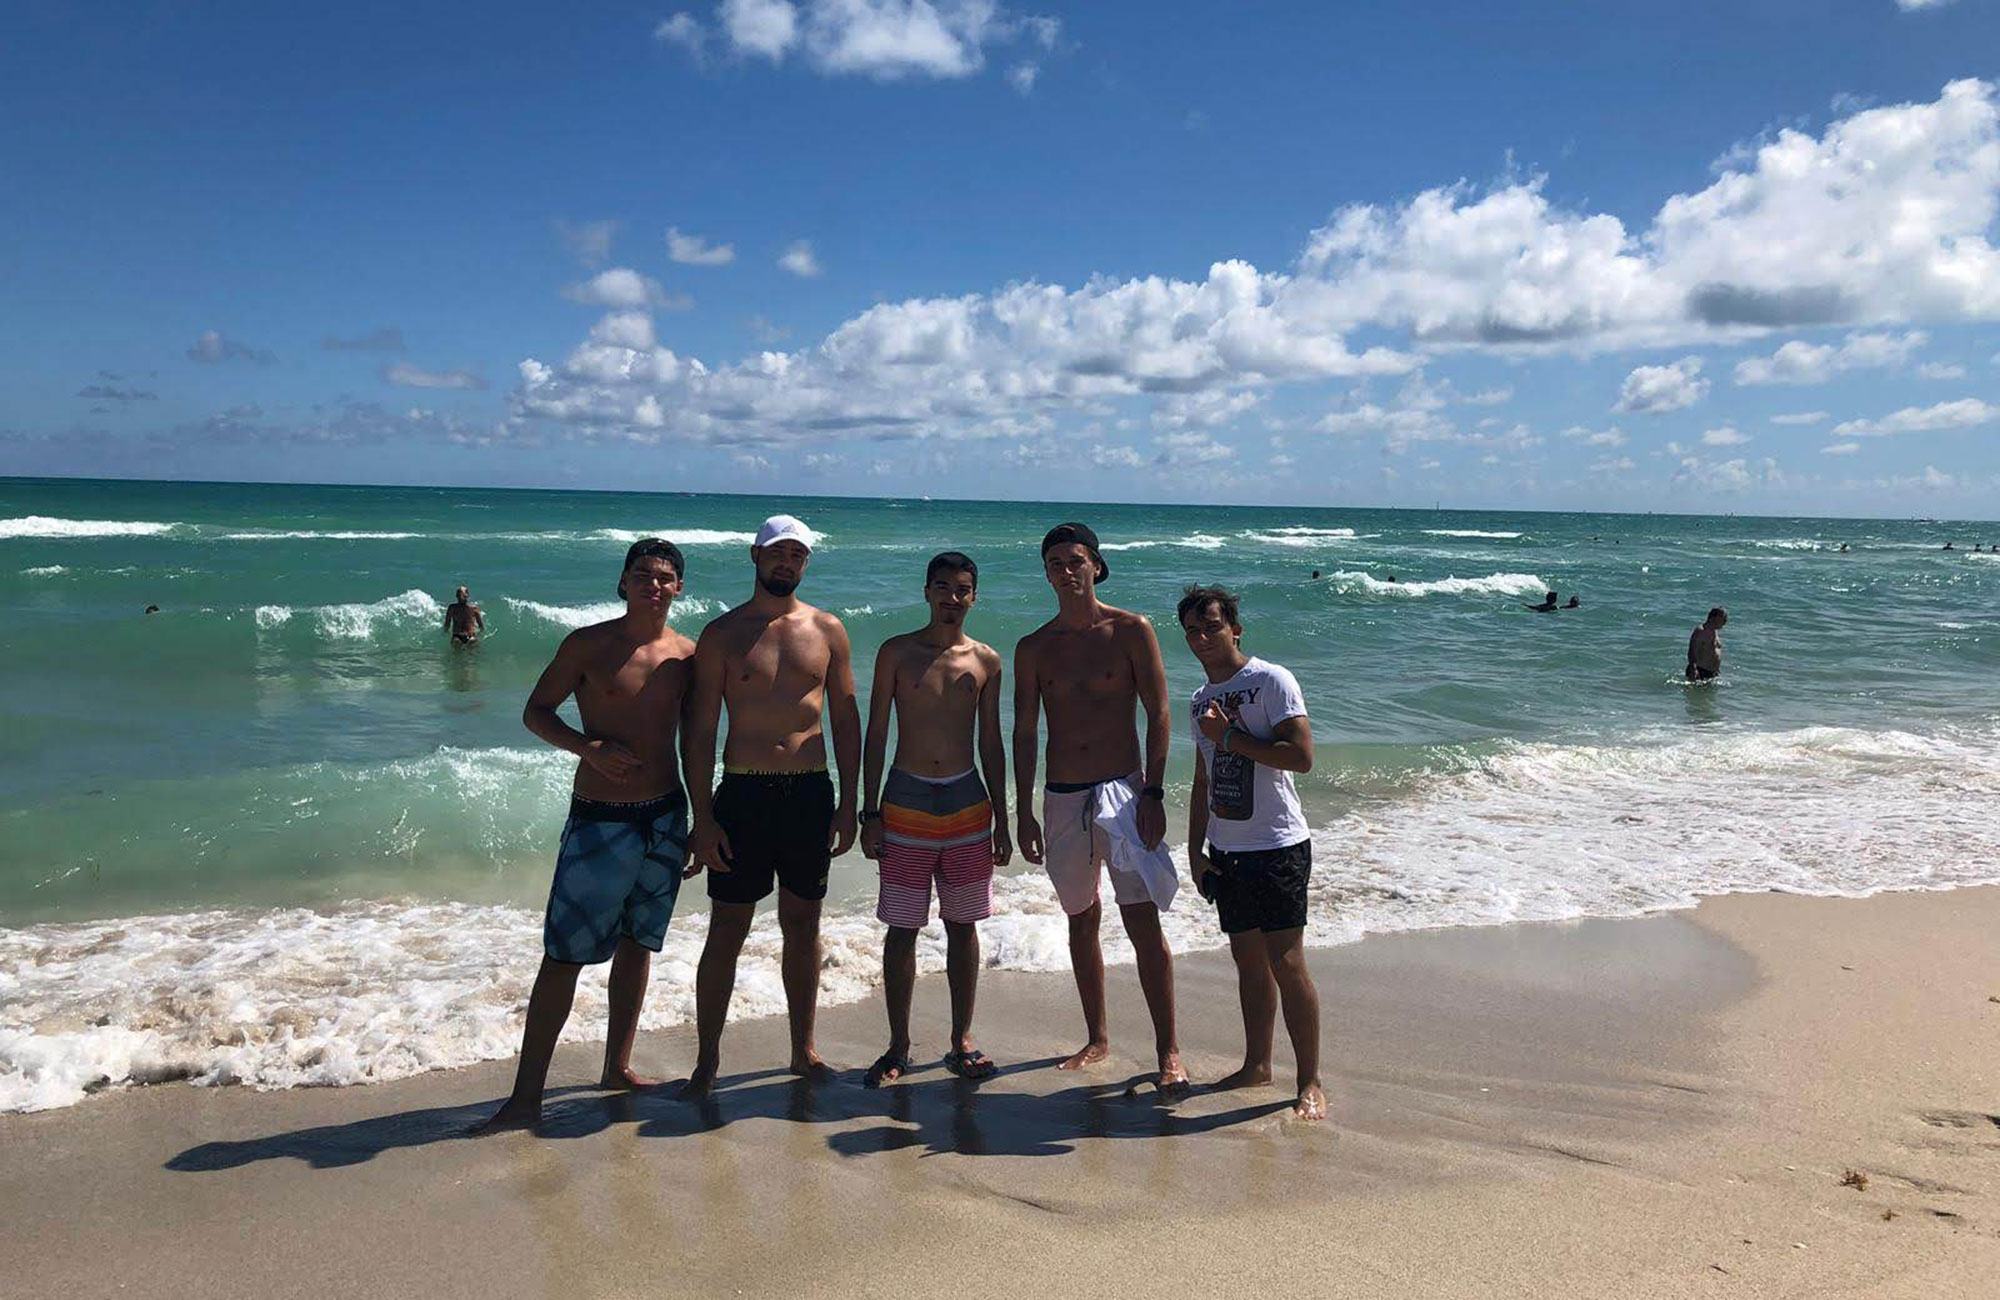 gavin with friends in florida